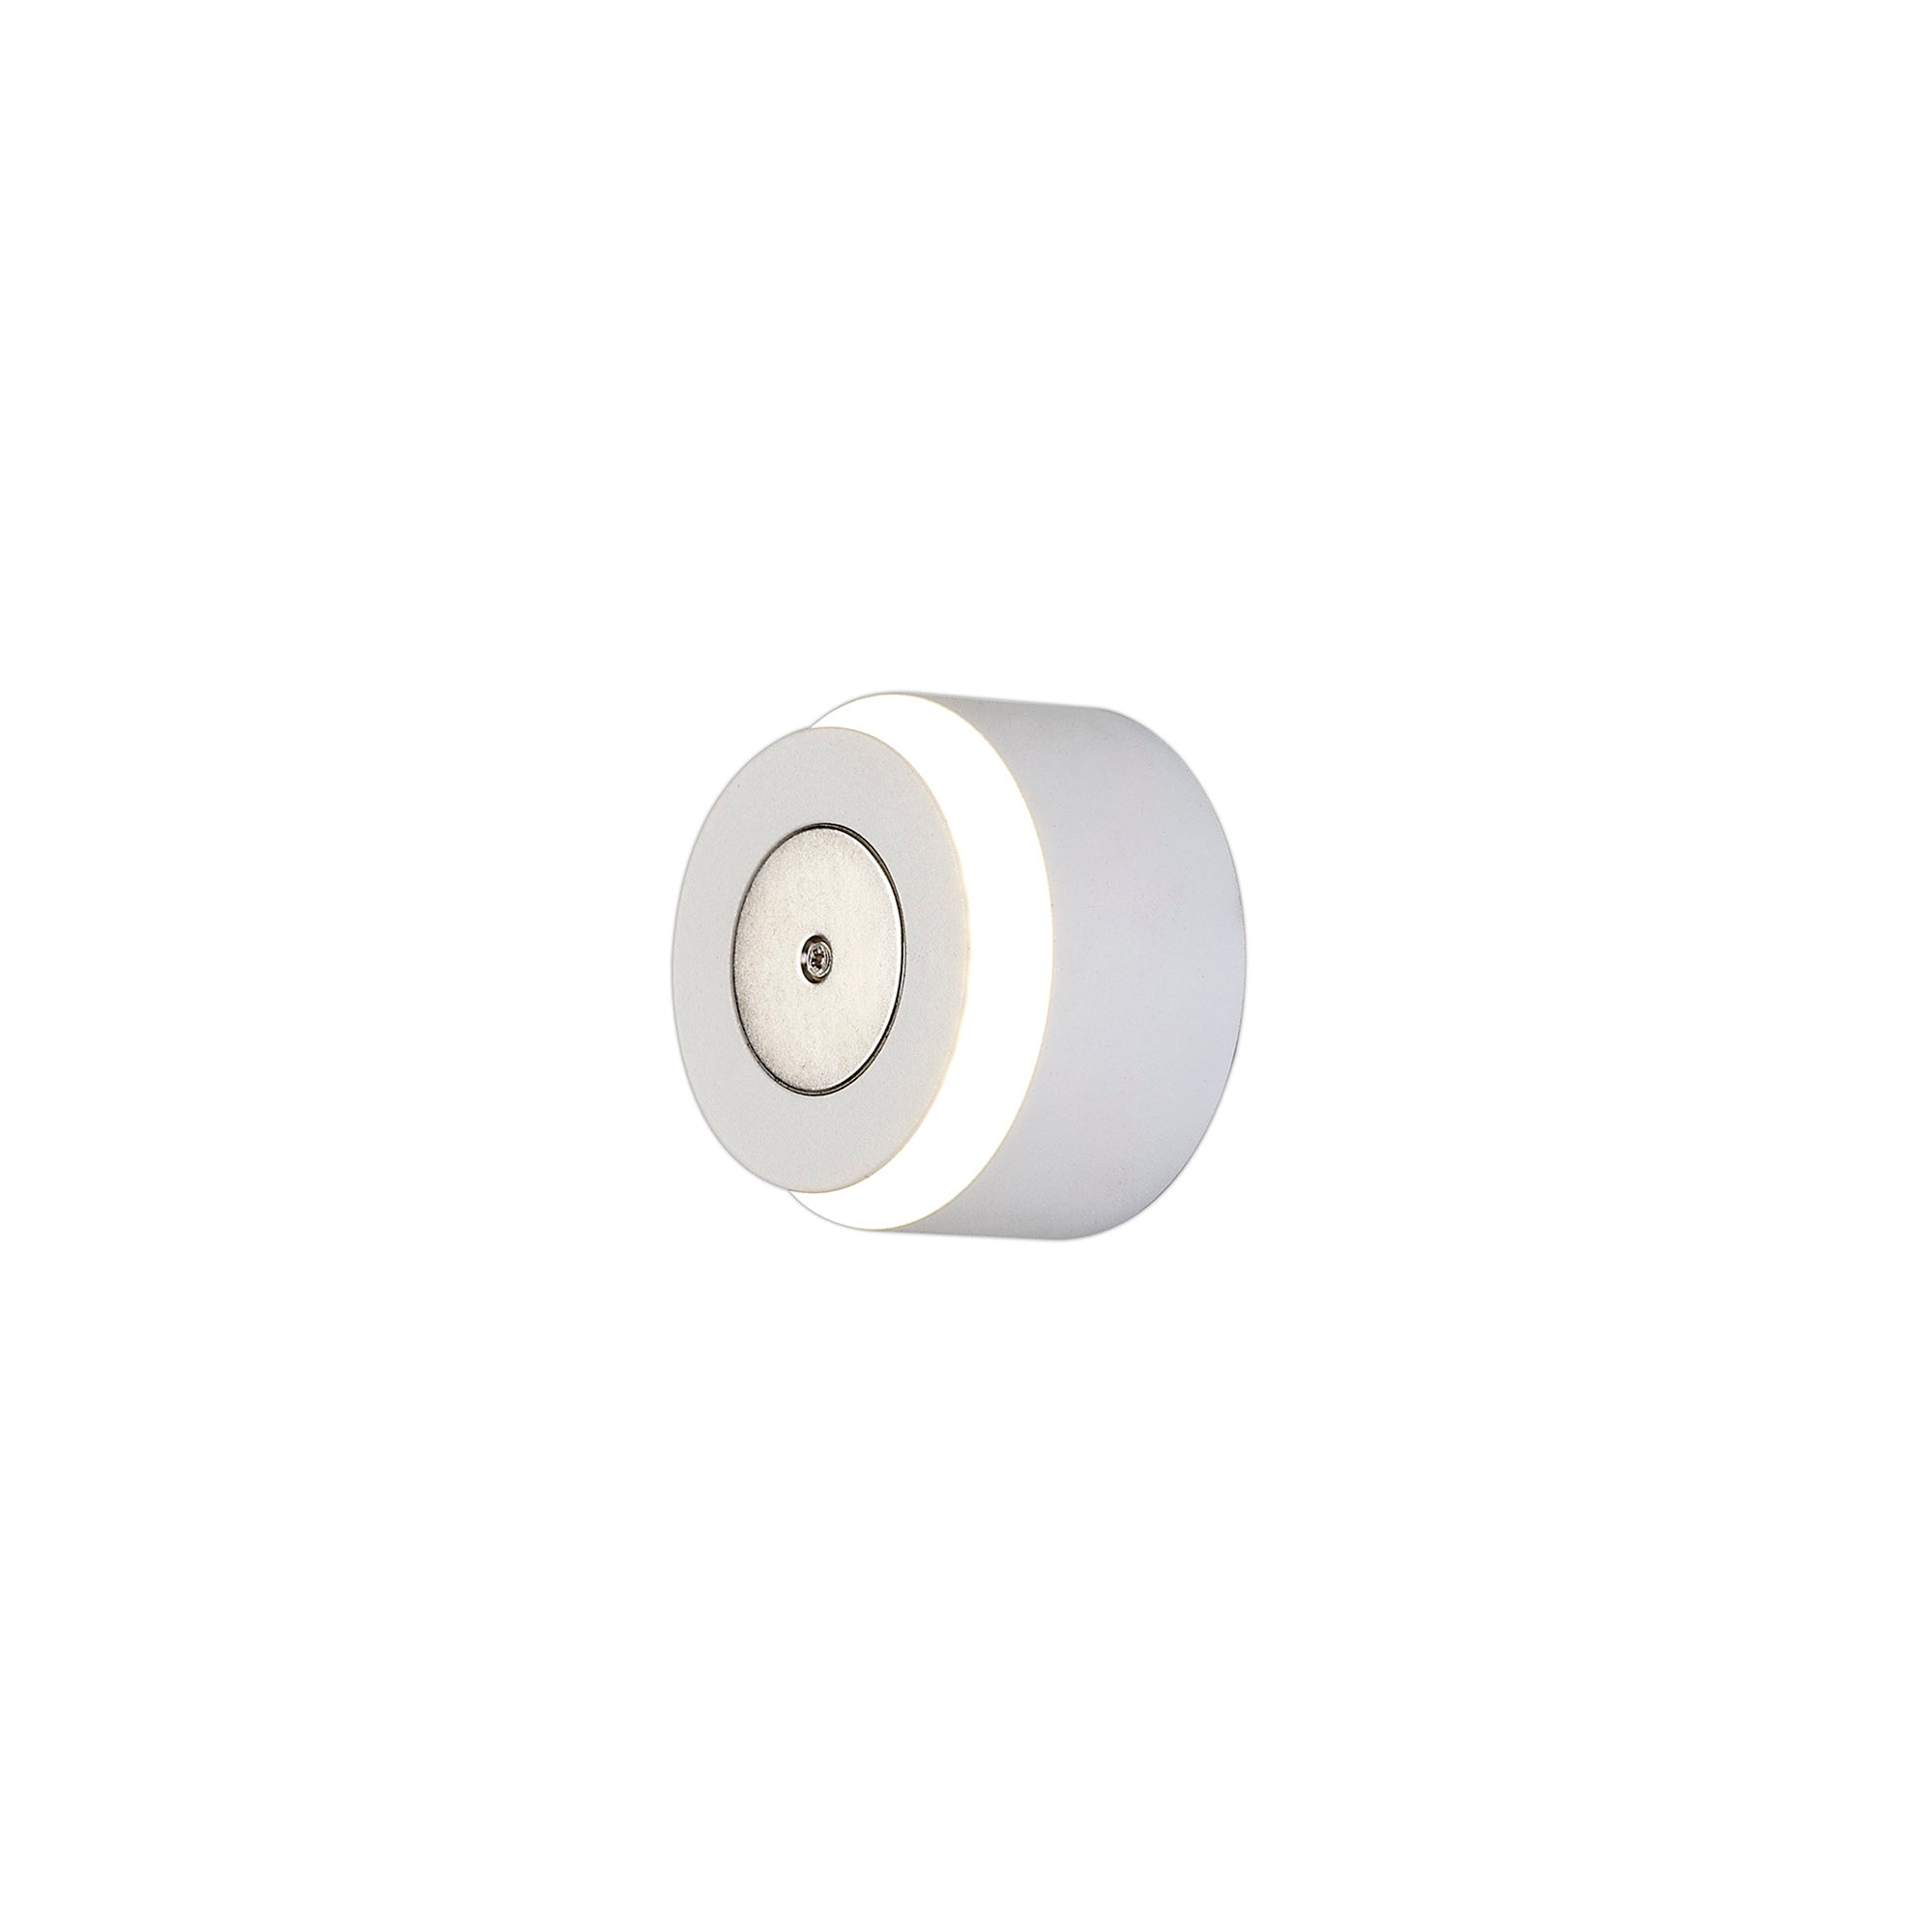 Modus Magnetic Base Wall Lamp, 1 x 12W LED, 3000K, 498lm, Sand White, 3yrs Warranty